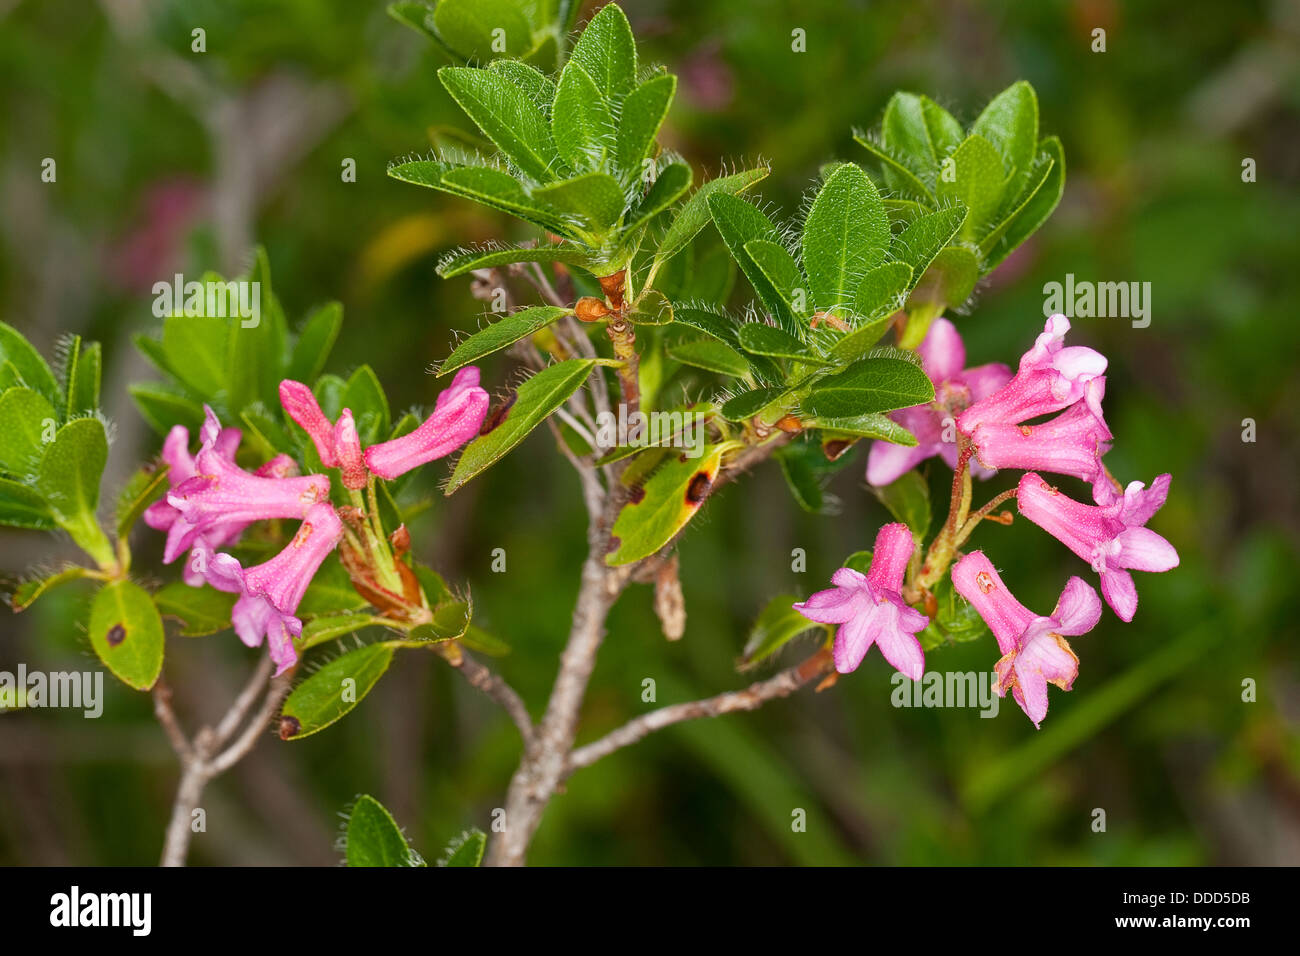 Hairy Alpen Rose, Rhododendron pubescent, Bewimperte Alpenrose, Behaarte Alpenrose, Almrausch, Rhododendron hirsutum Stock Photo